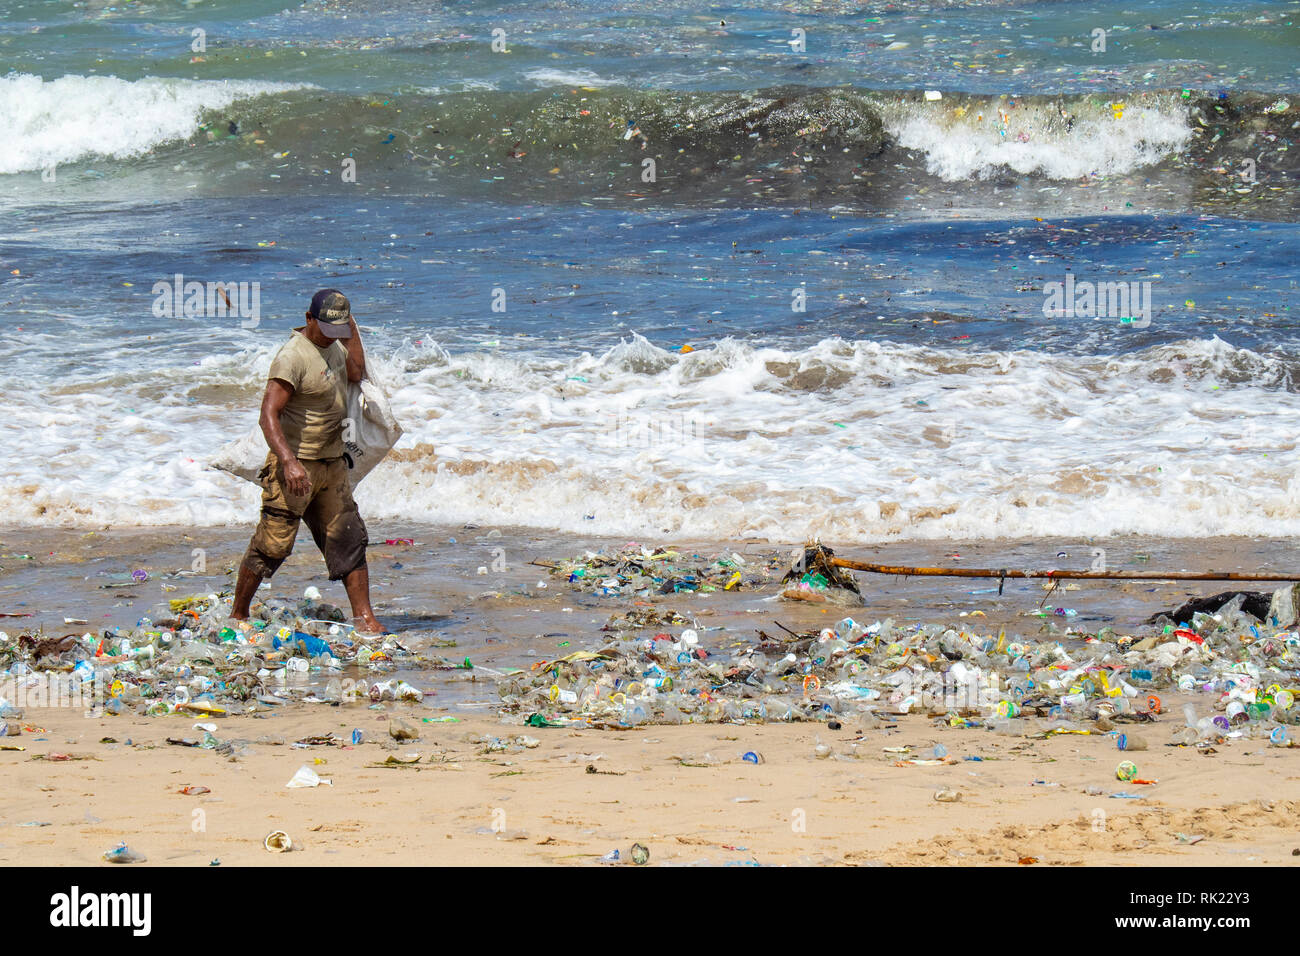 Pollution, lone man picking up plastic bottles, cups, straws and other litter washed up on the beach at Jimbaran Bay, Bali Indonesia.. Stock Photo